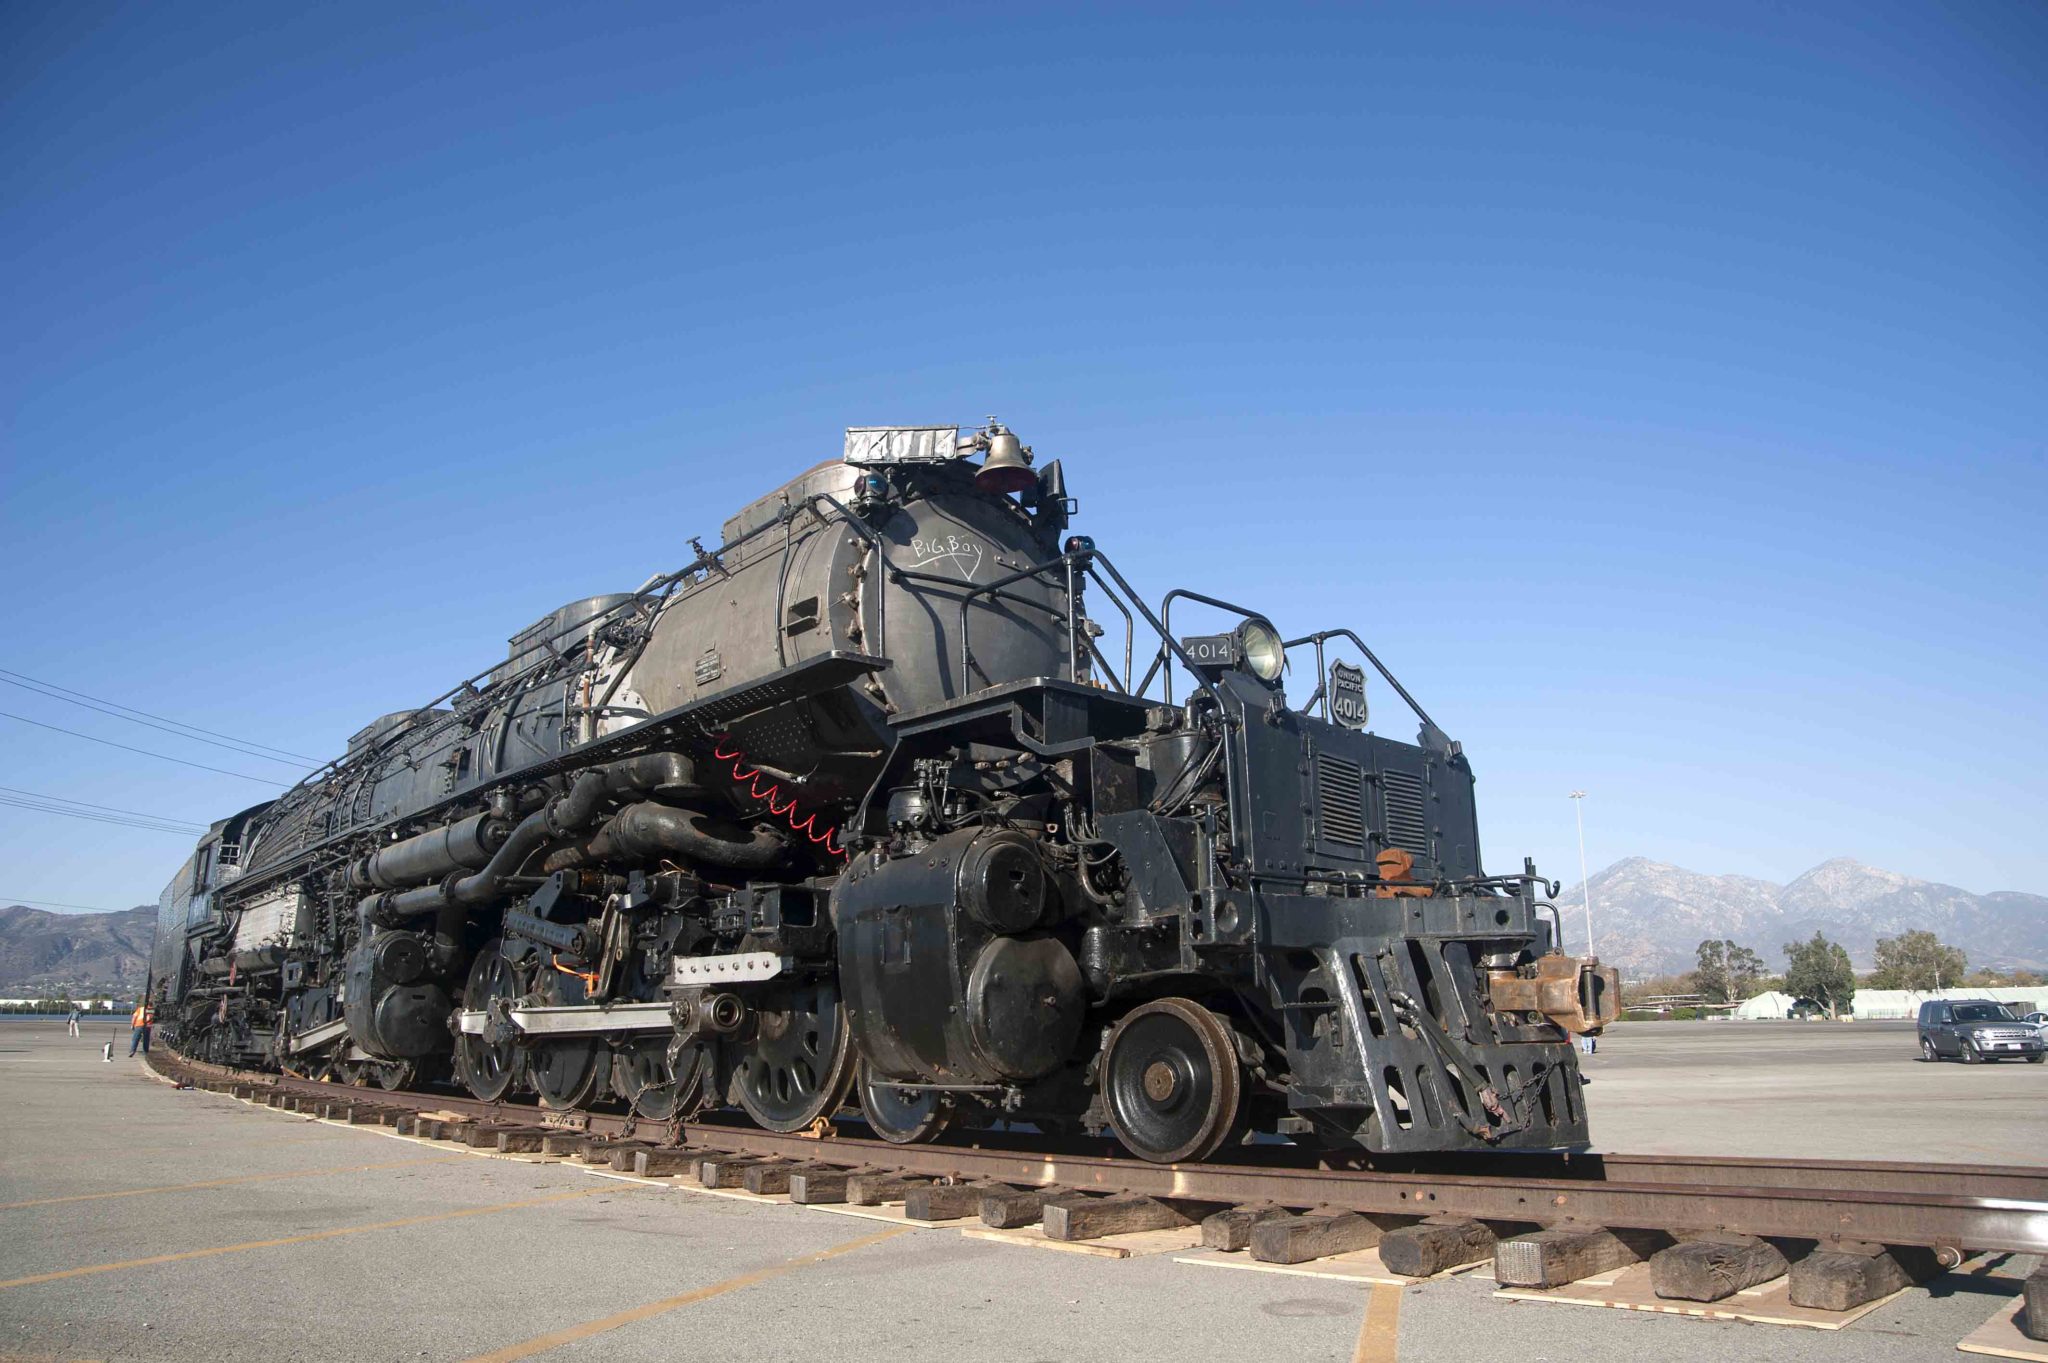 Big Boy No. 4014 fired up for the first time; May 12 excursion